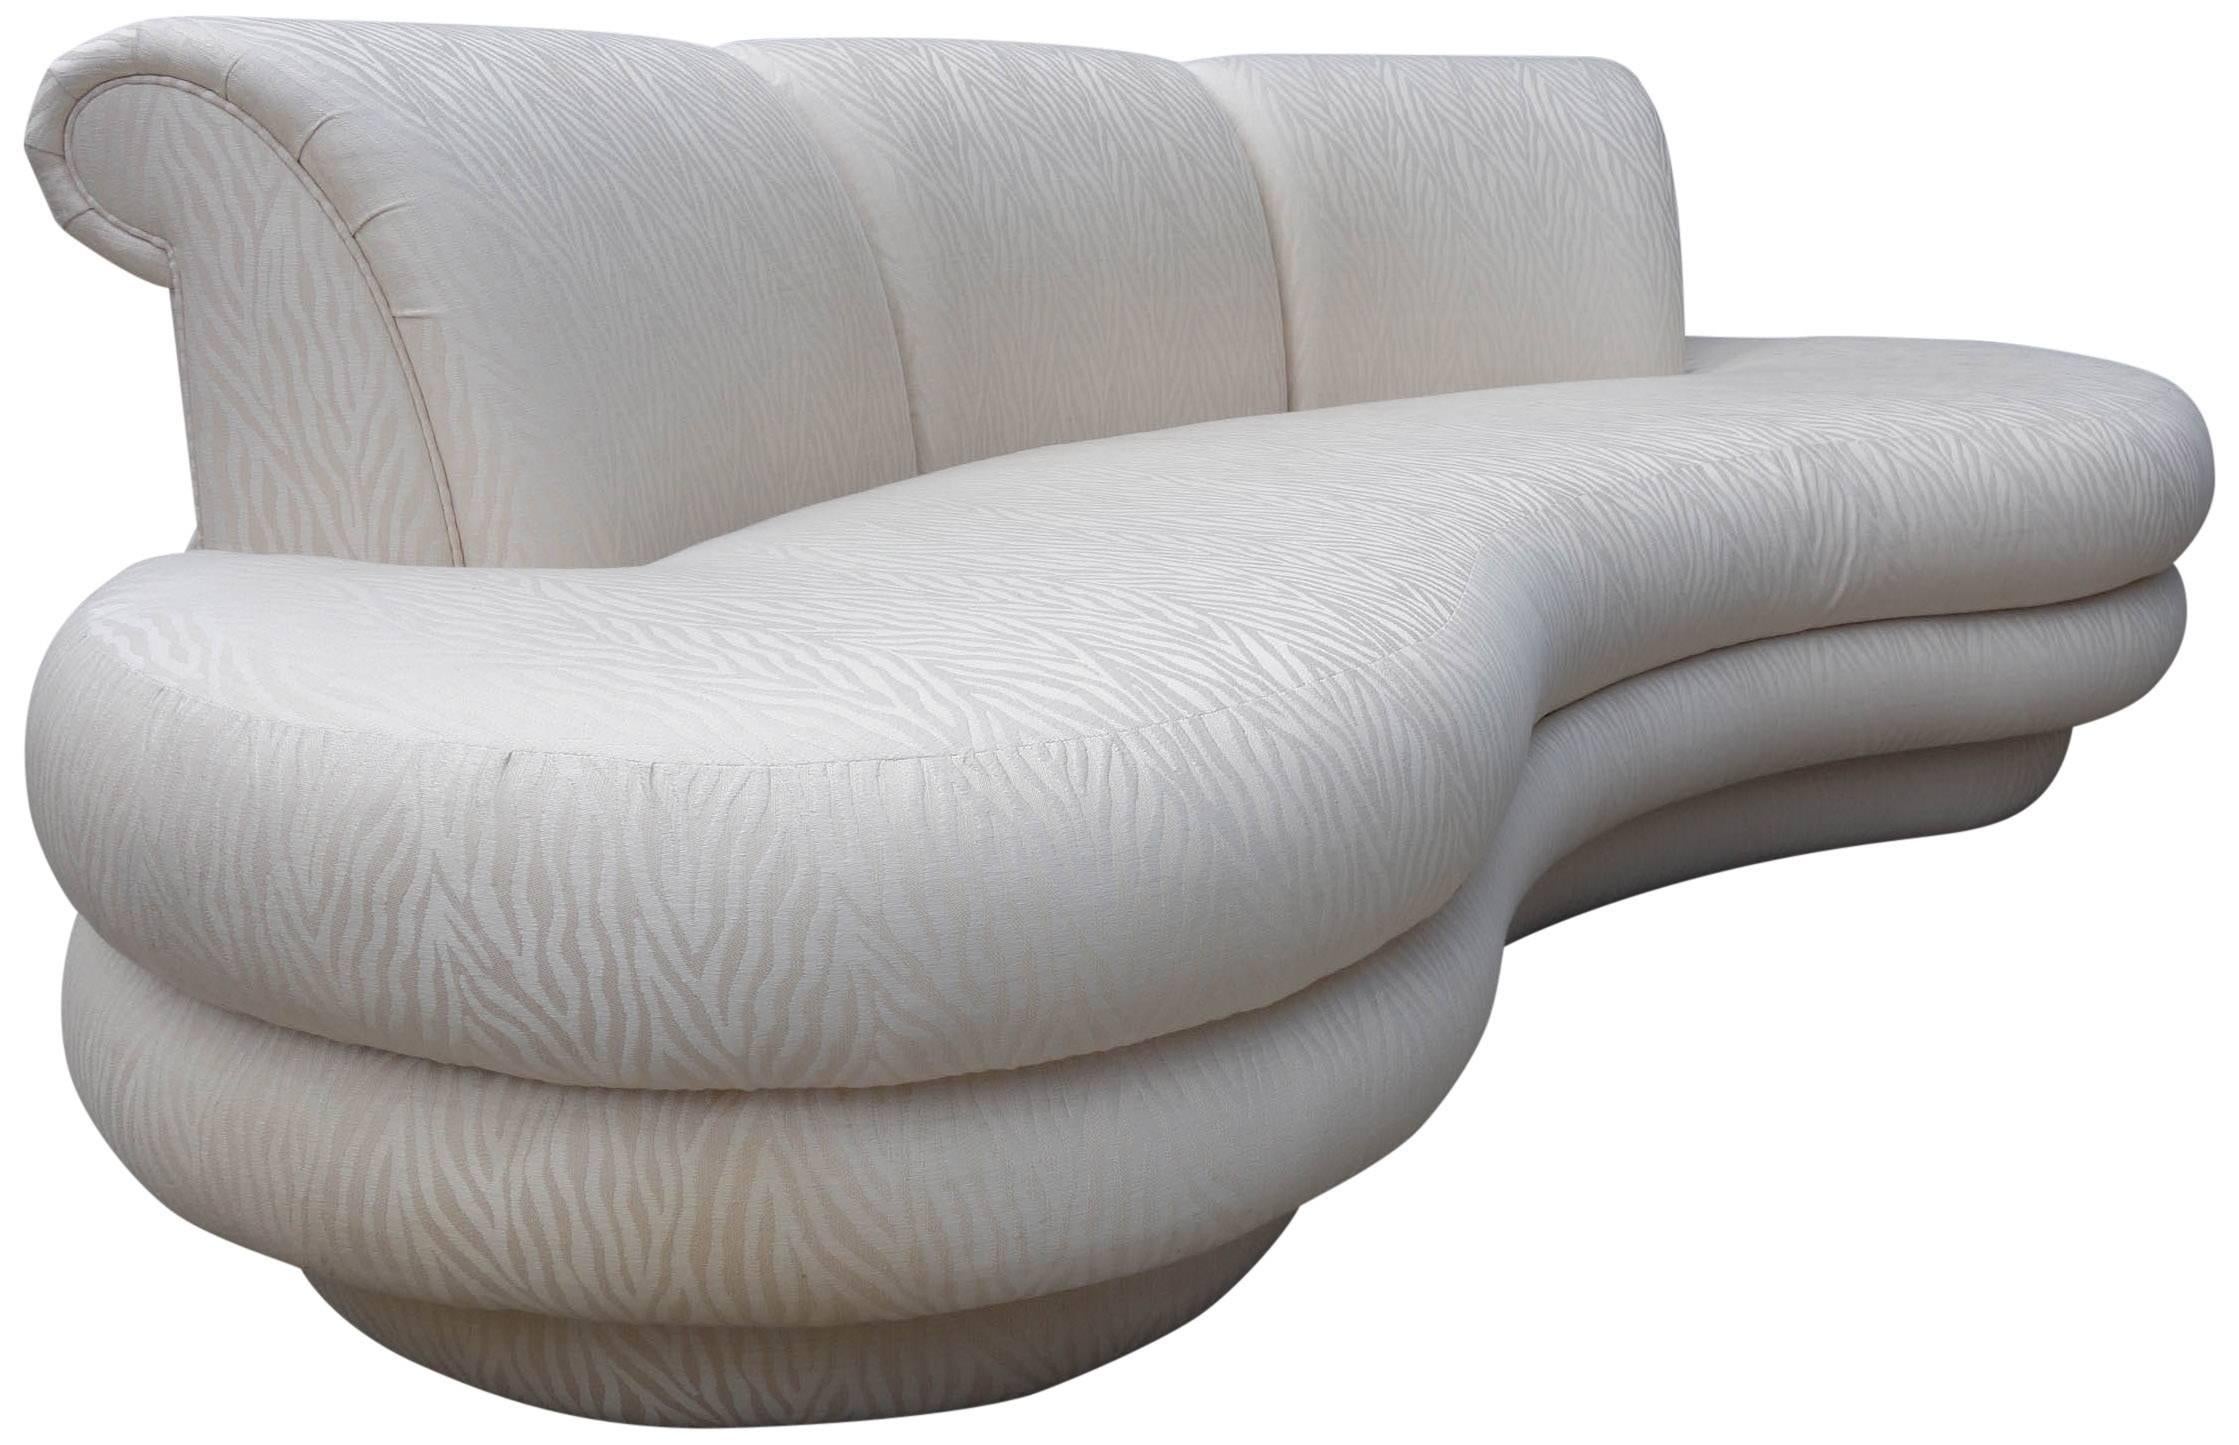 Late 20th Century Adrian Pearsall Kidney Shaped / Curved Sofa for Comfort Designs